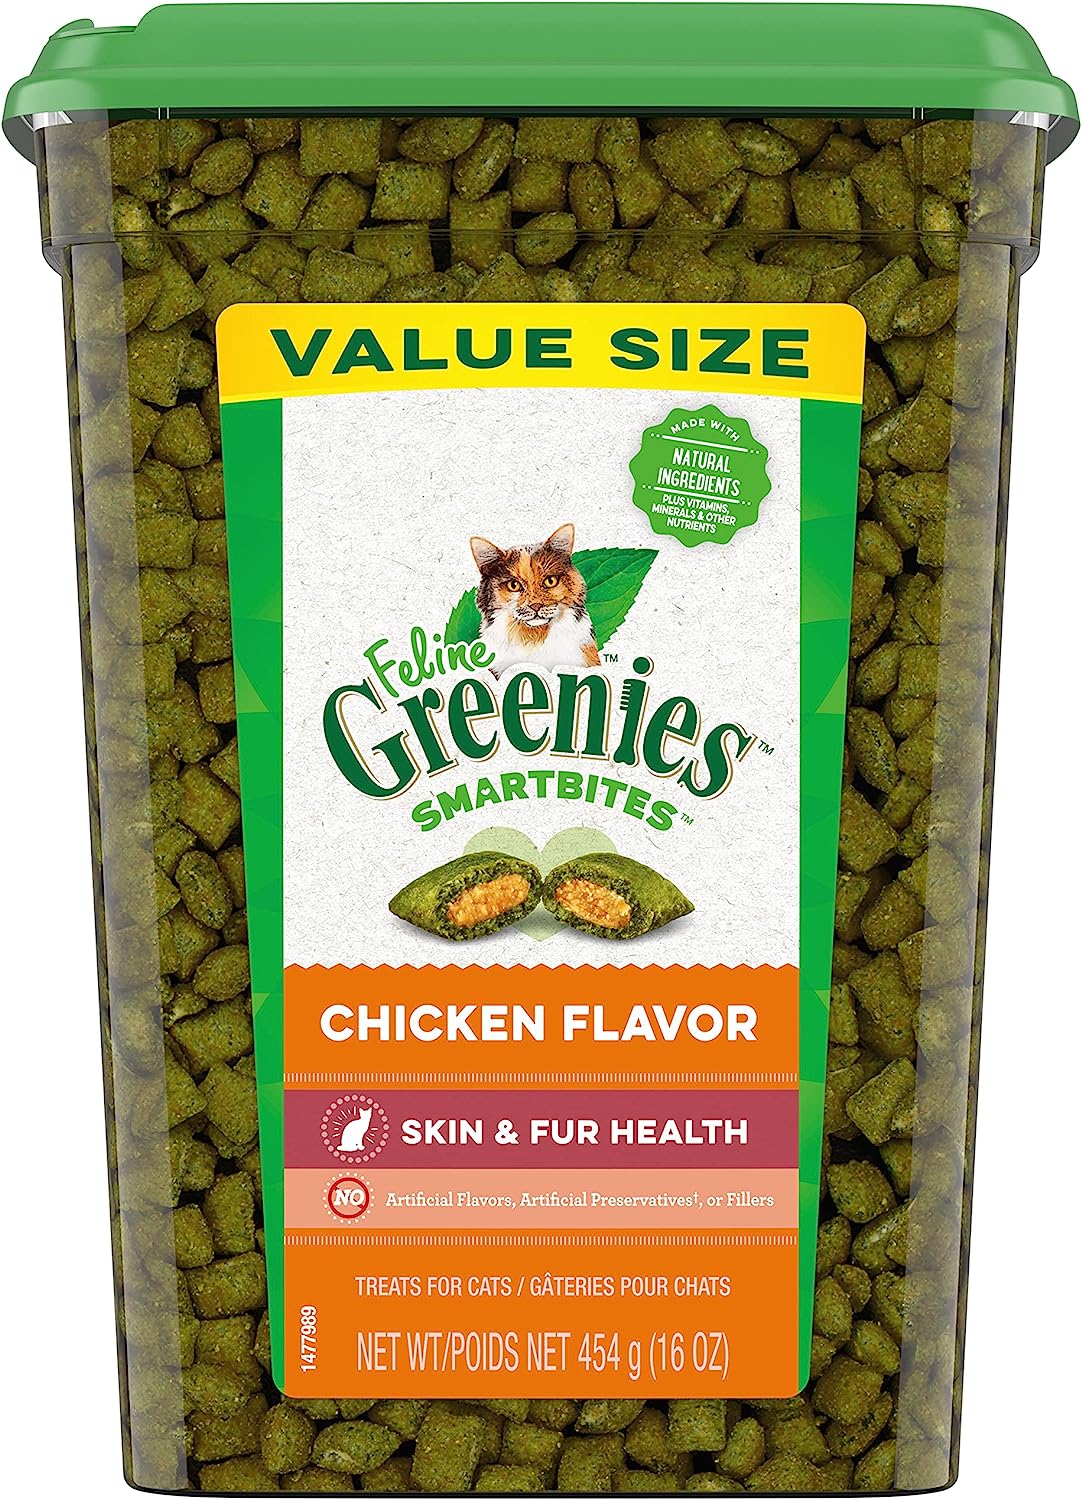 Greenies Feline Smartbites Skin & Fur Crunchy and Soft Textured Adult Natural Cat Treats, Chicken Flavor, 16 oz. Tub (Package may vary)